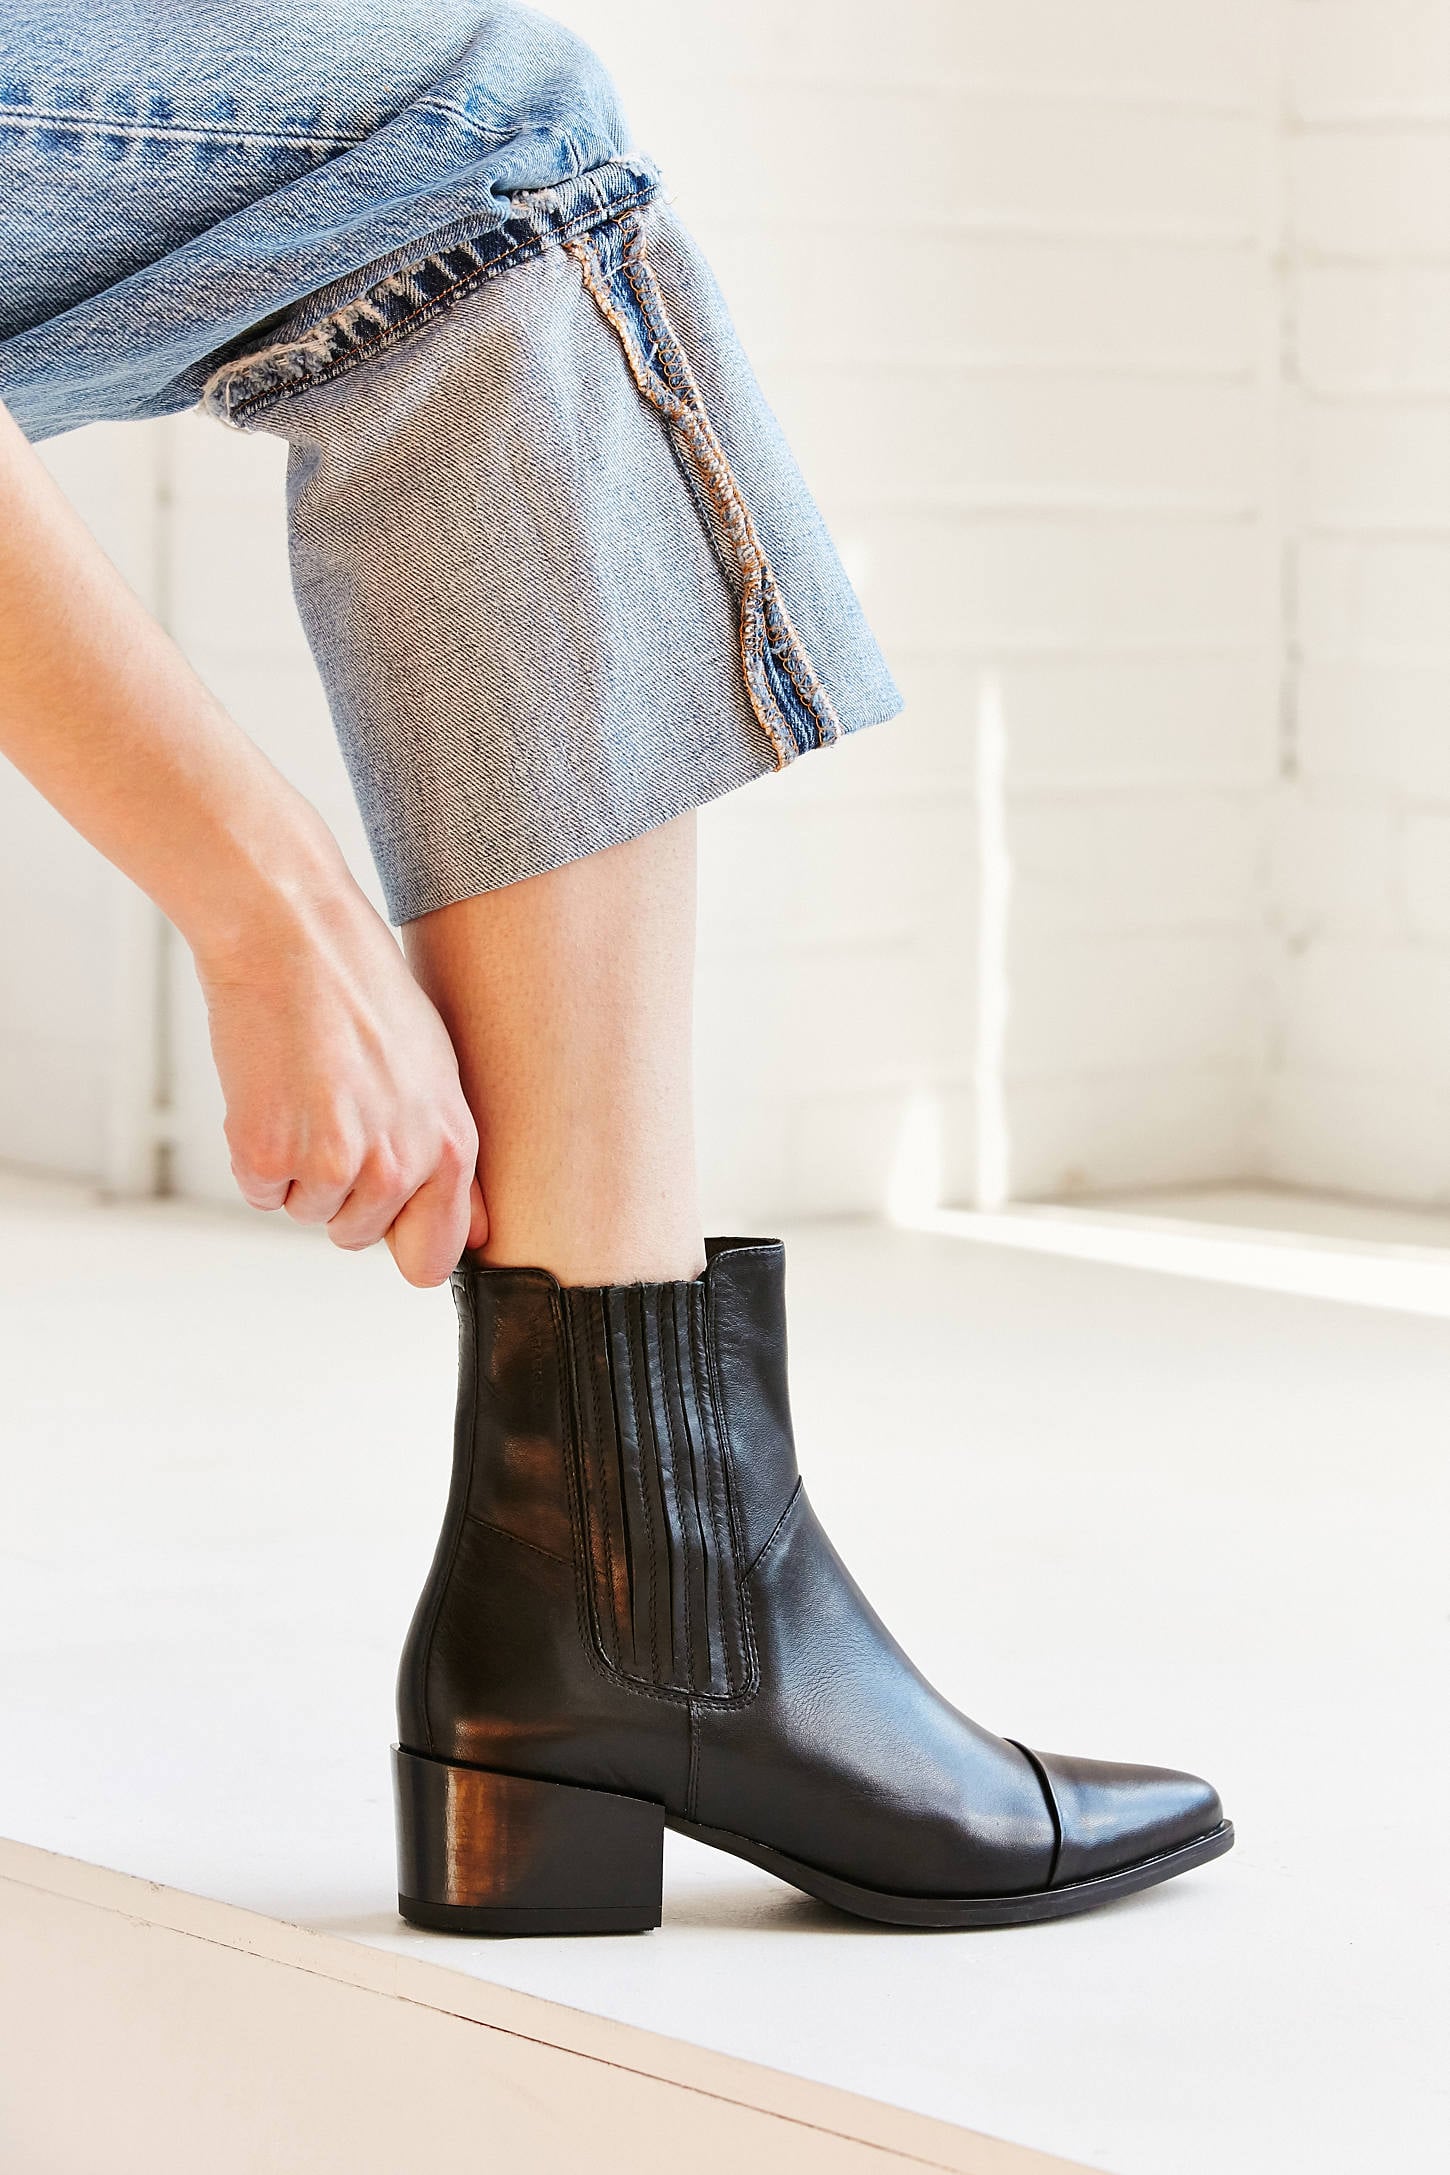 Vagabond Shoemakers Marja | Behold! Our 79 Favorite (Seriously Stylish) Boots For Fall 2019 | POPSUGAR Fashion